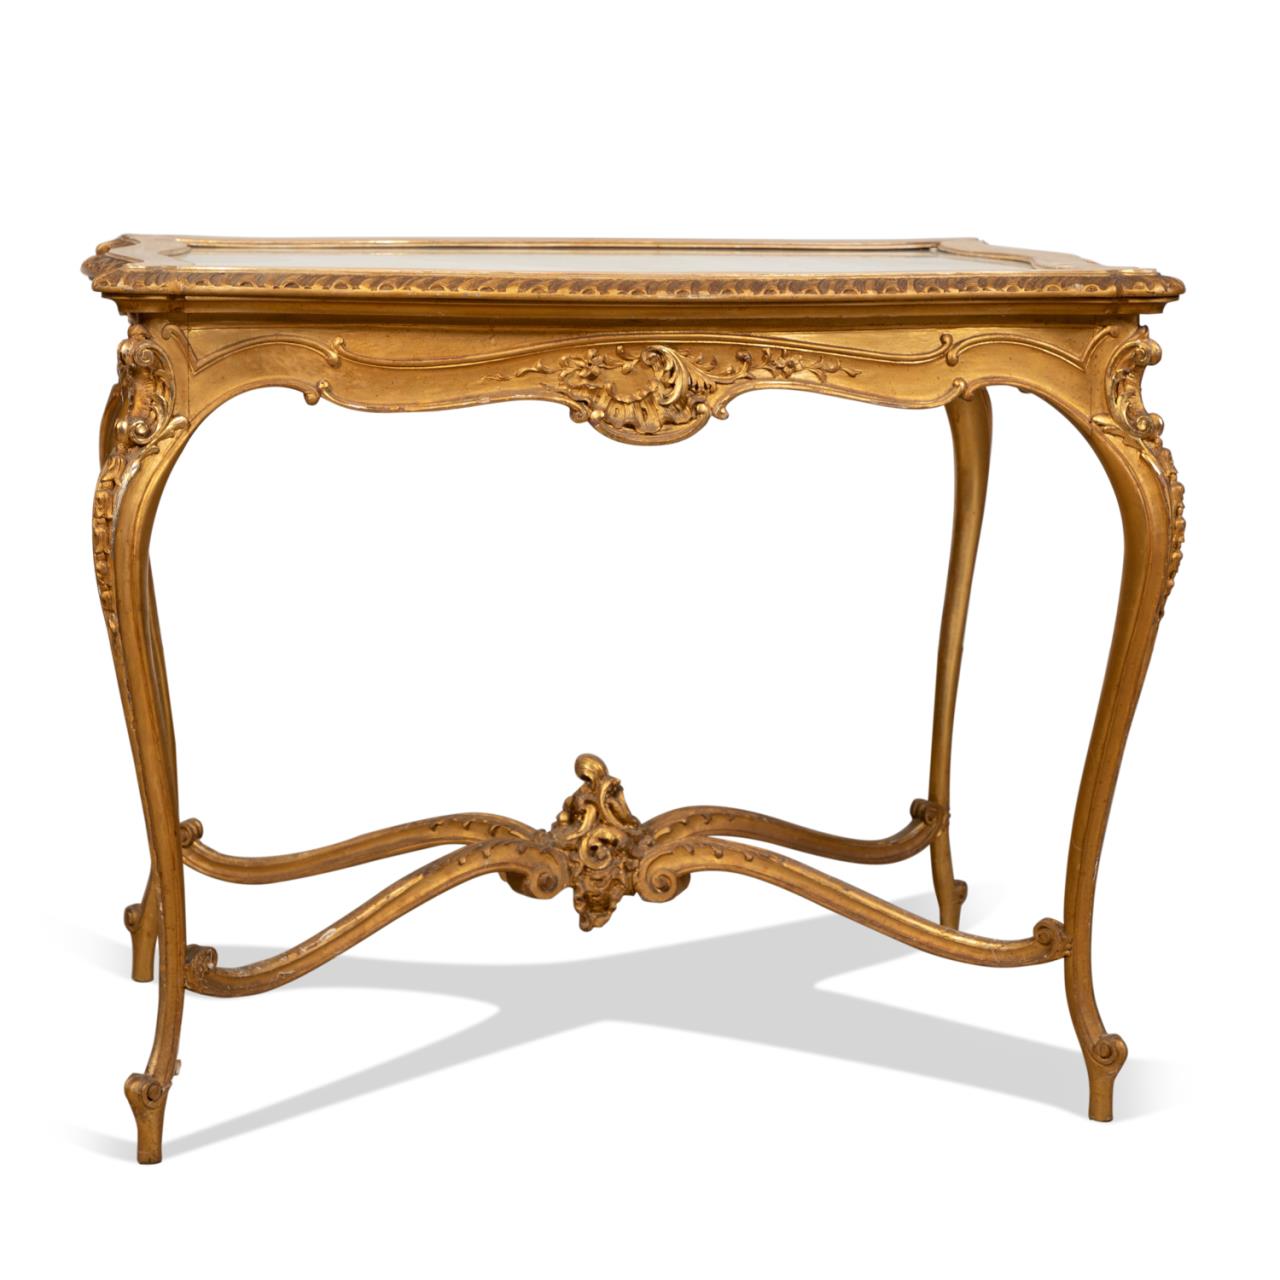 ROCOCO STYLE GILTWOOD TABLE WITH 2889a8